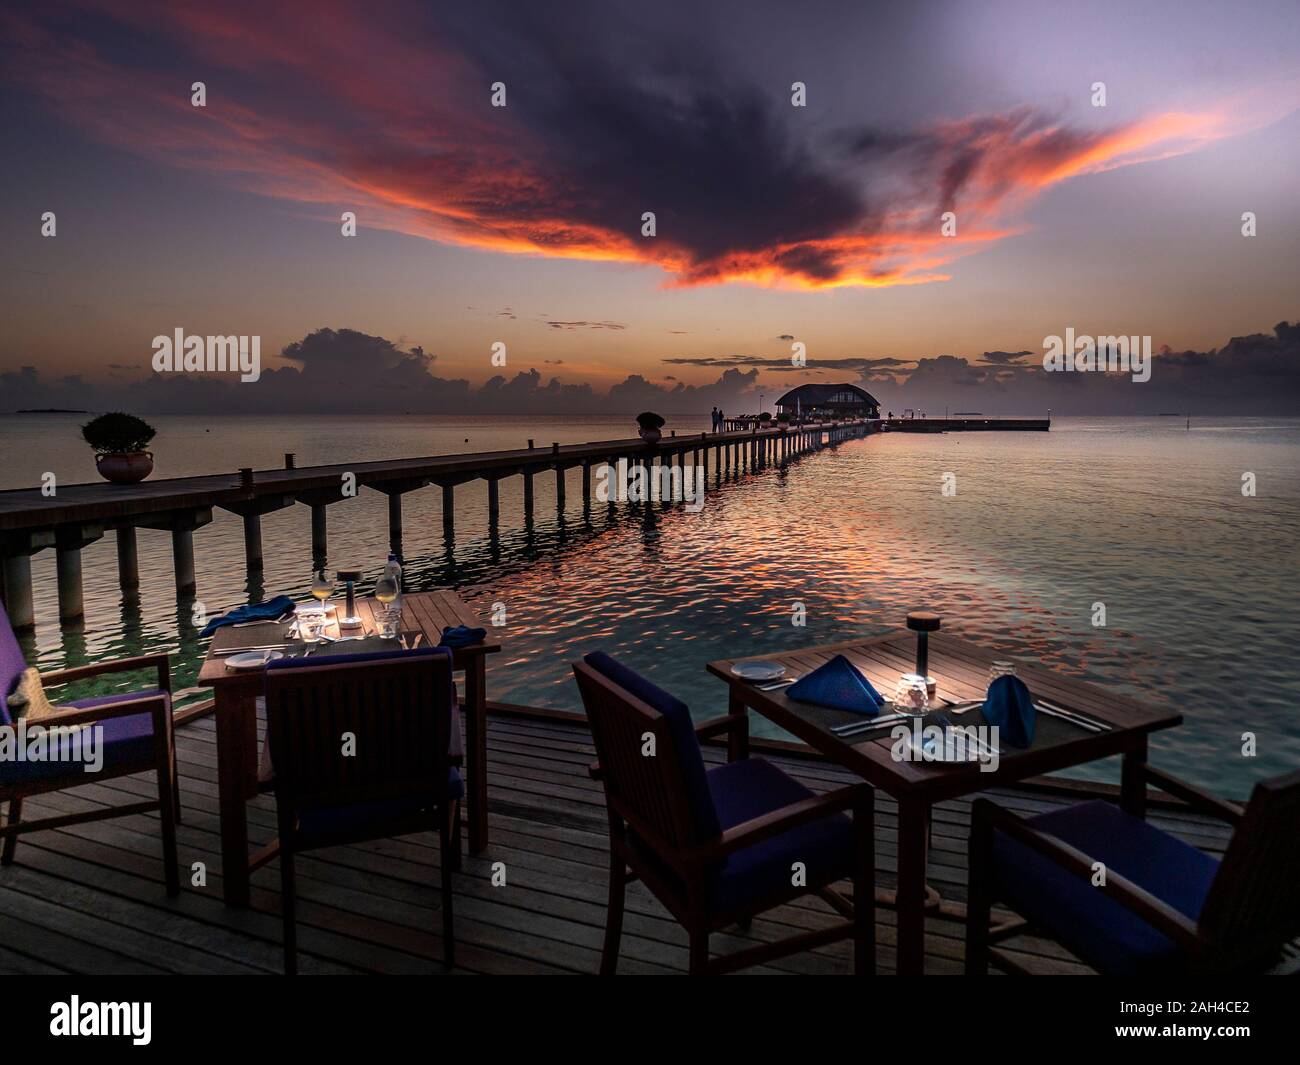 Maldives, Dining tables of coastal restaurant at dusk with pier in background Stock Photo